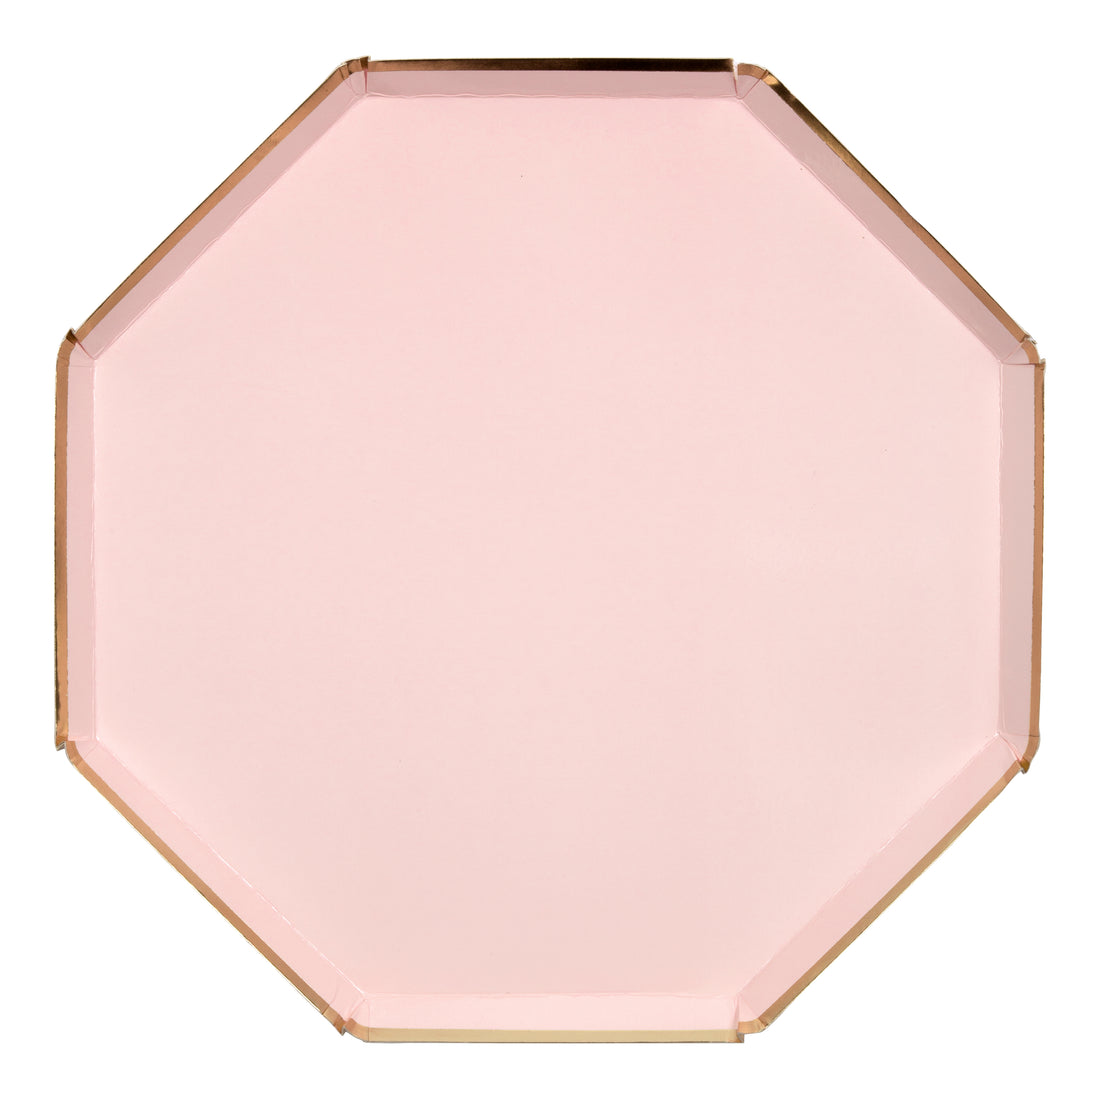 large dusty pink octagonal plate